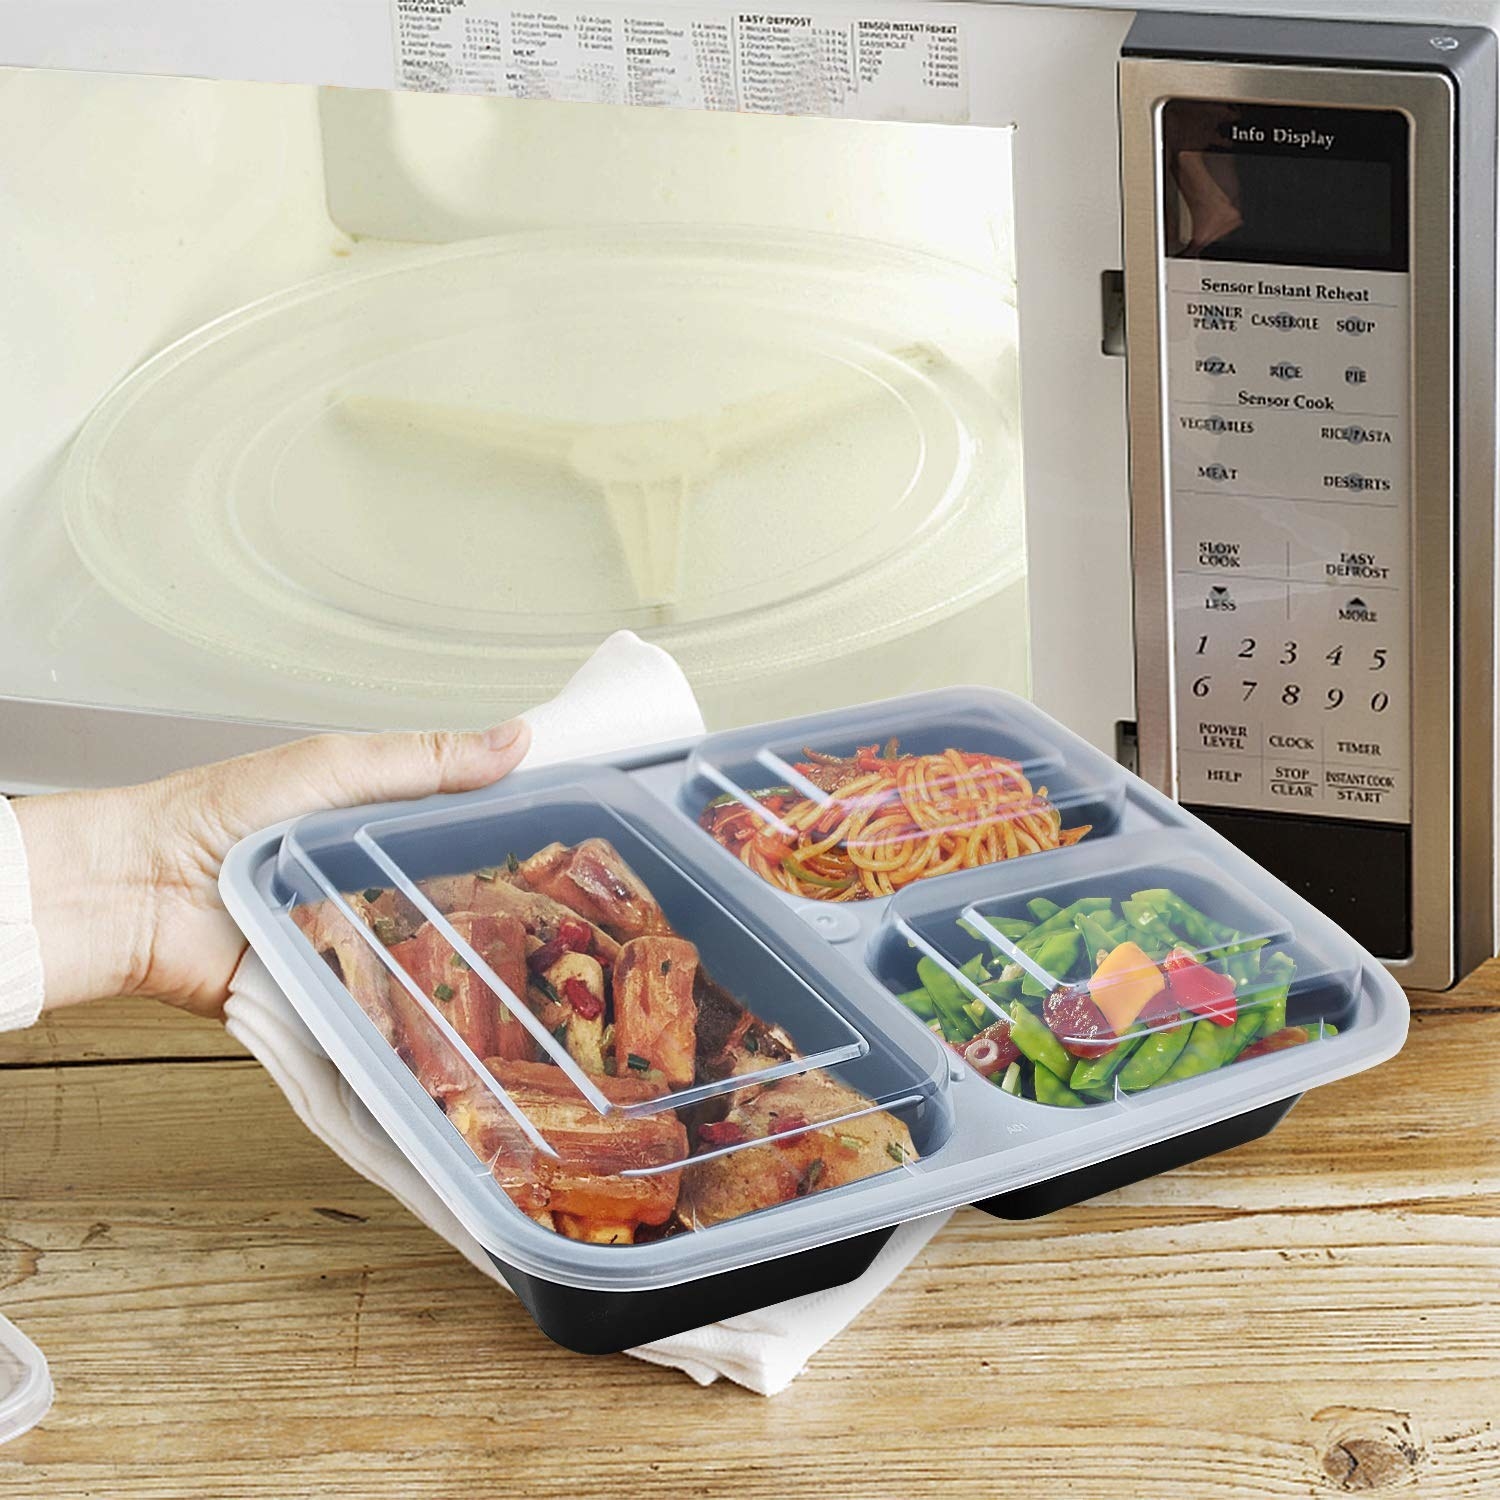 Meat, pasta, and salad stored in the three compartments of the bento box. A person is about to microwave it.